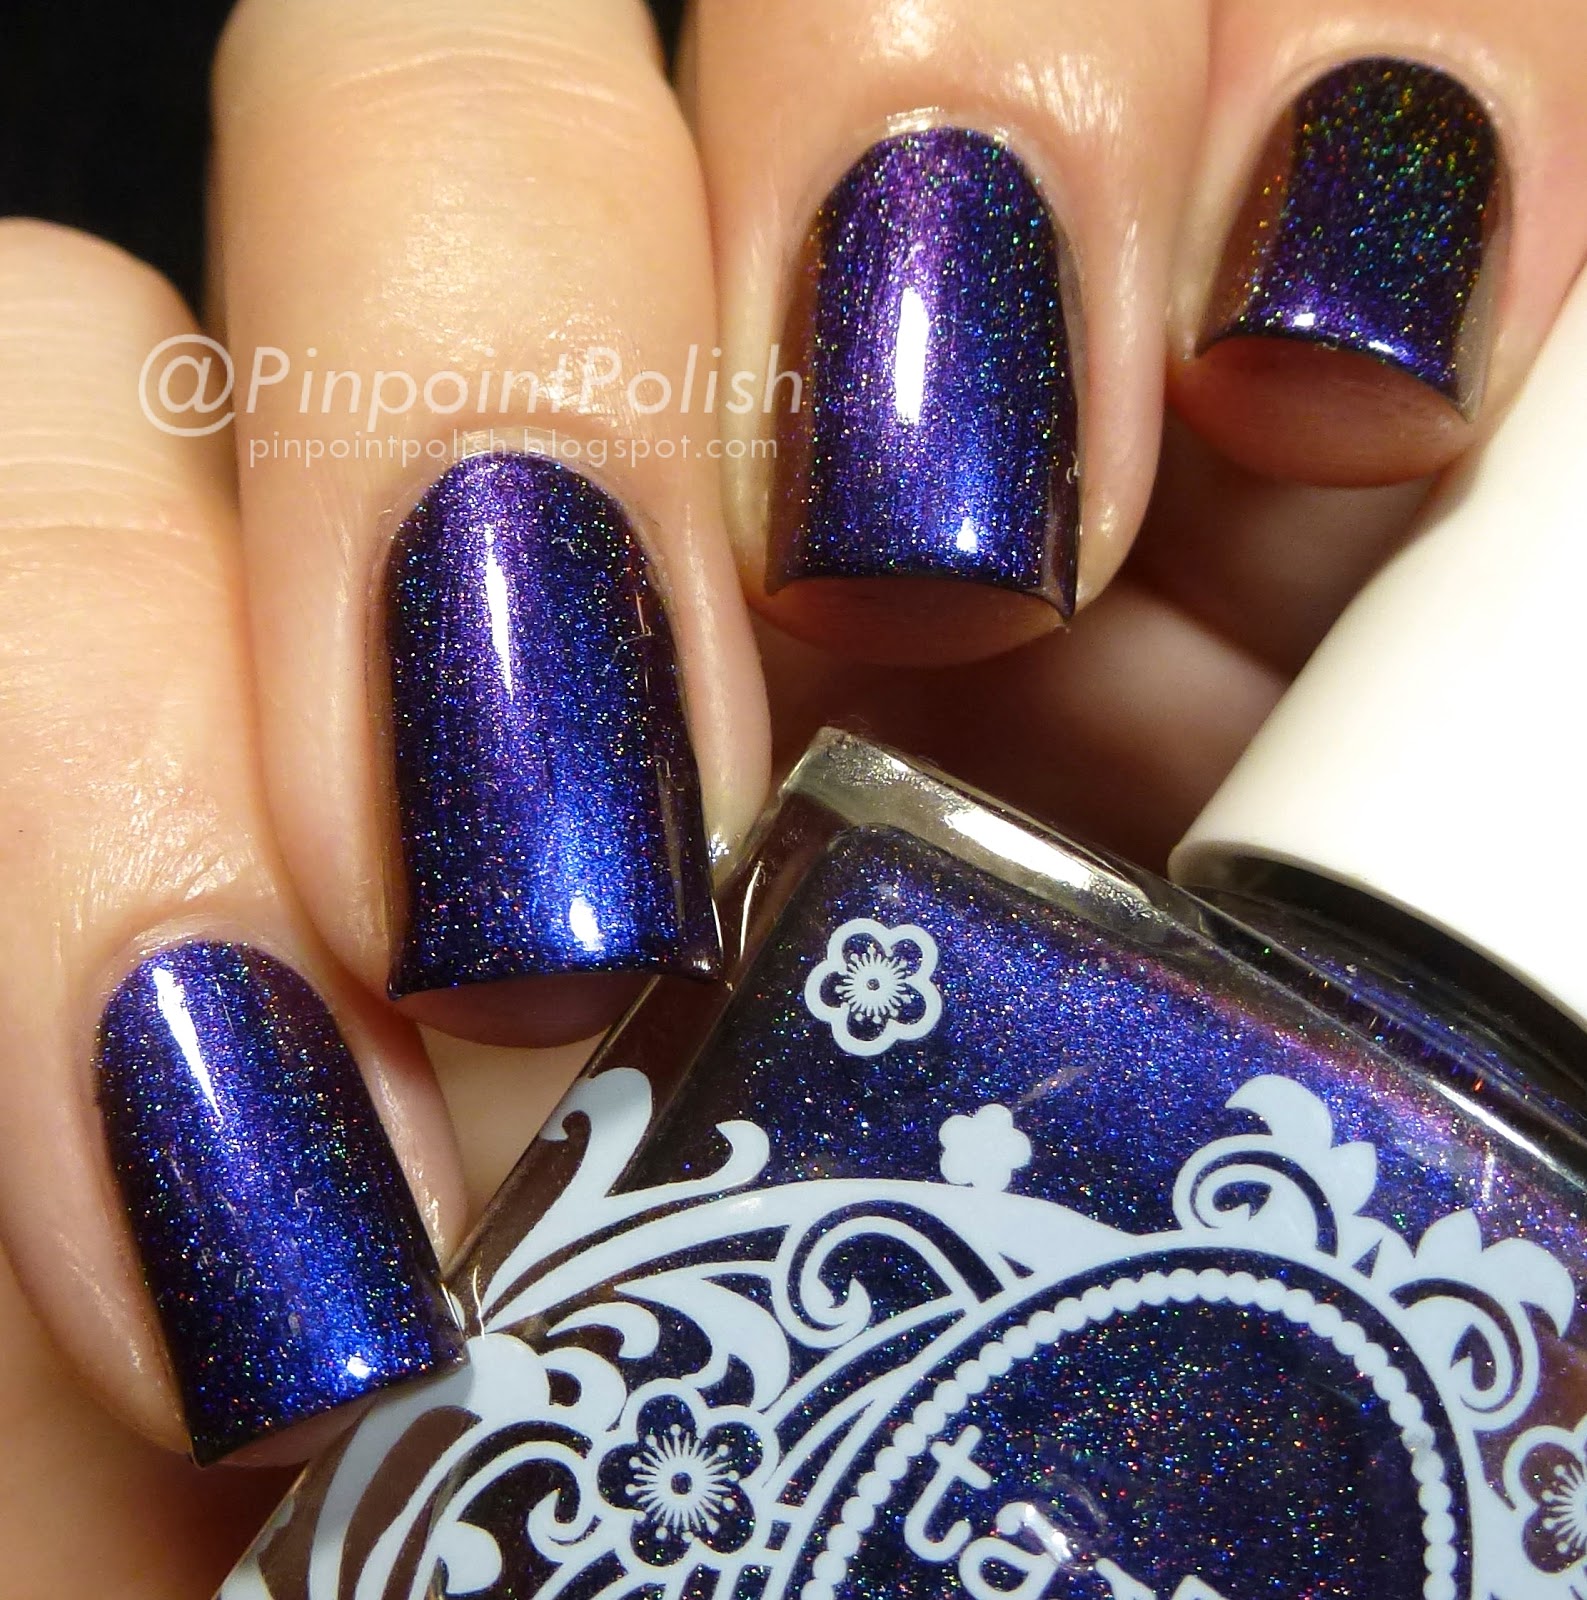 Dazed and confused, takko lacquer, swatch